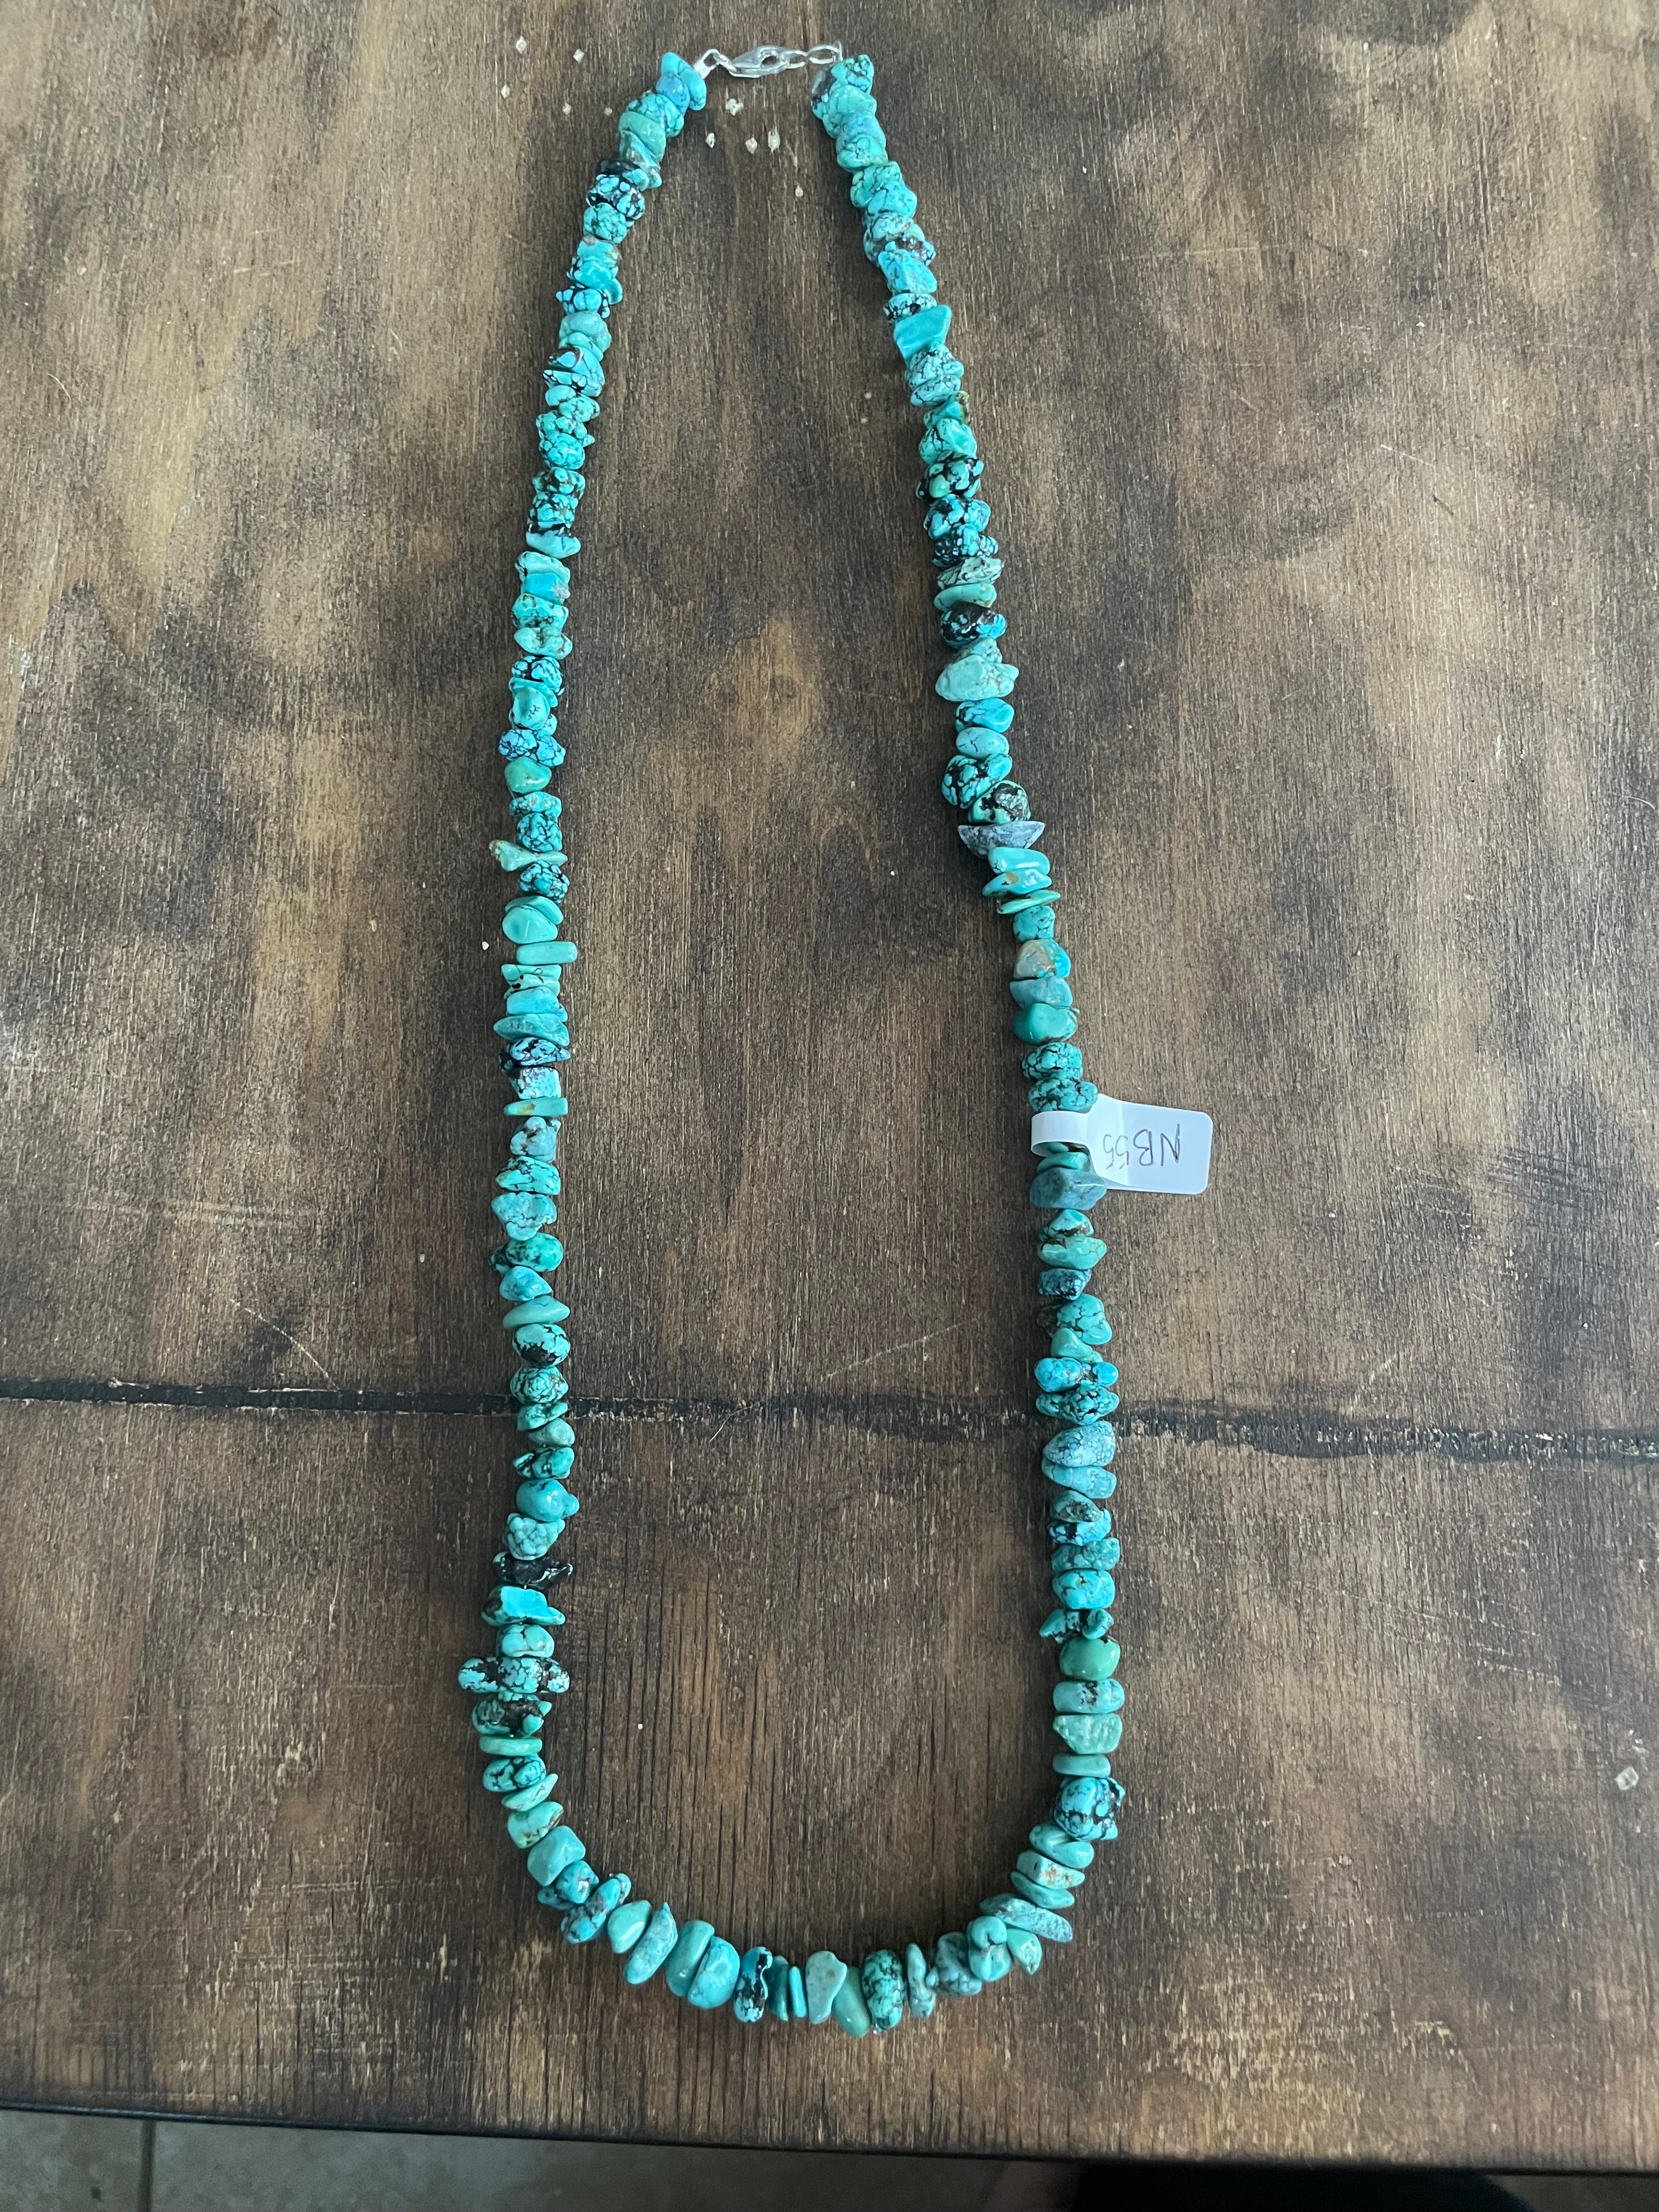 25in Stabilized Turquoise Necklace